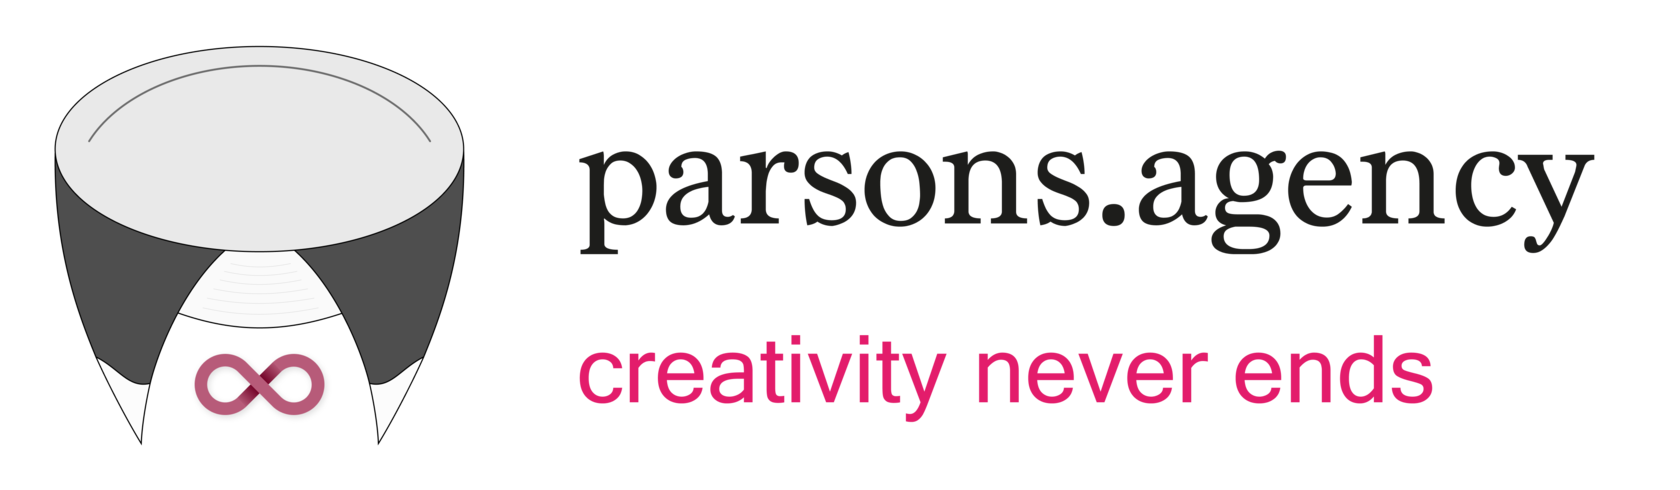 parsons.agency 